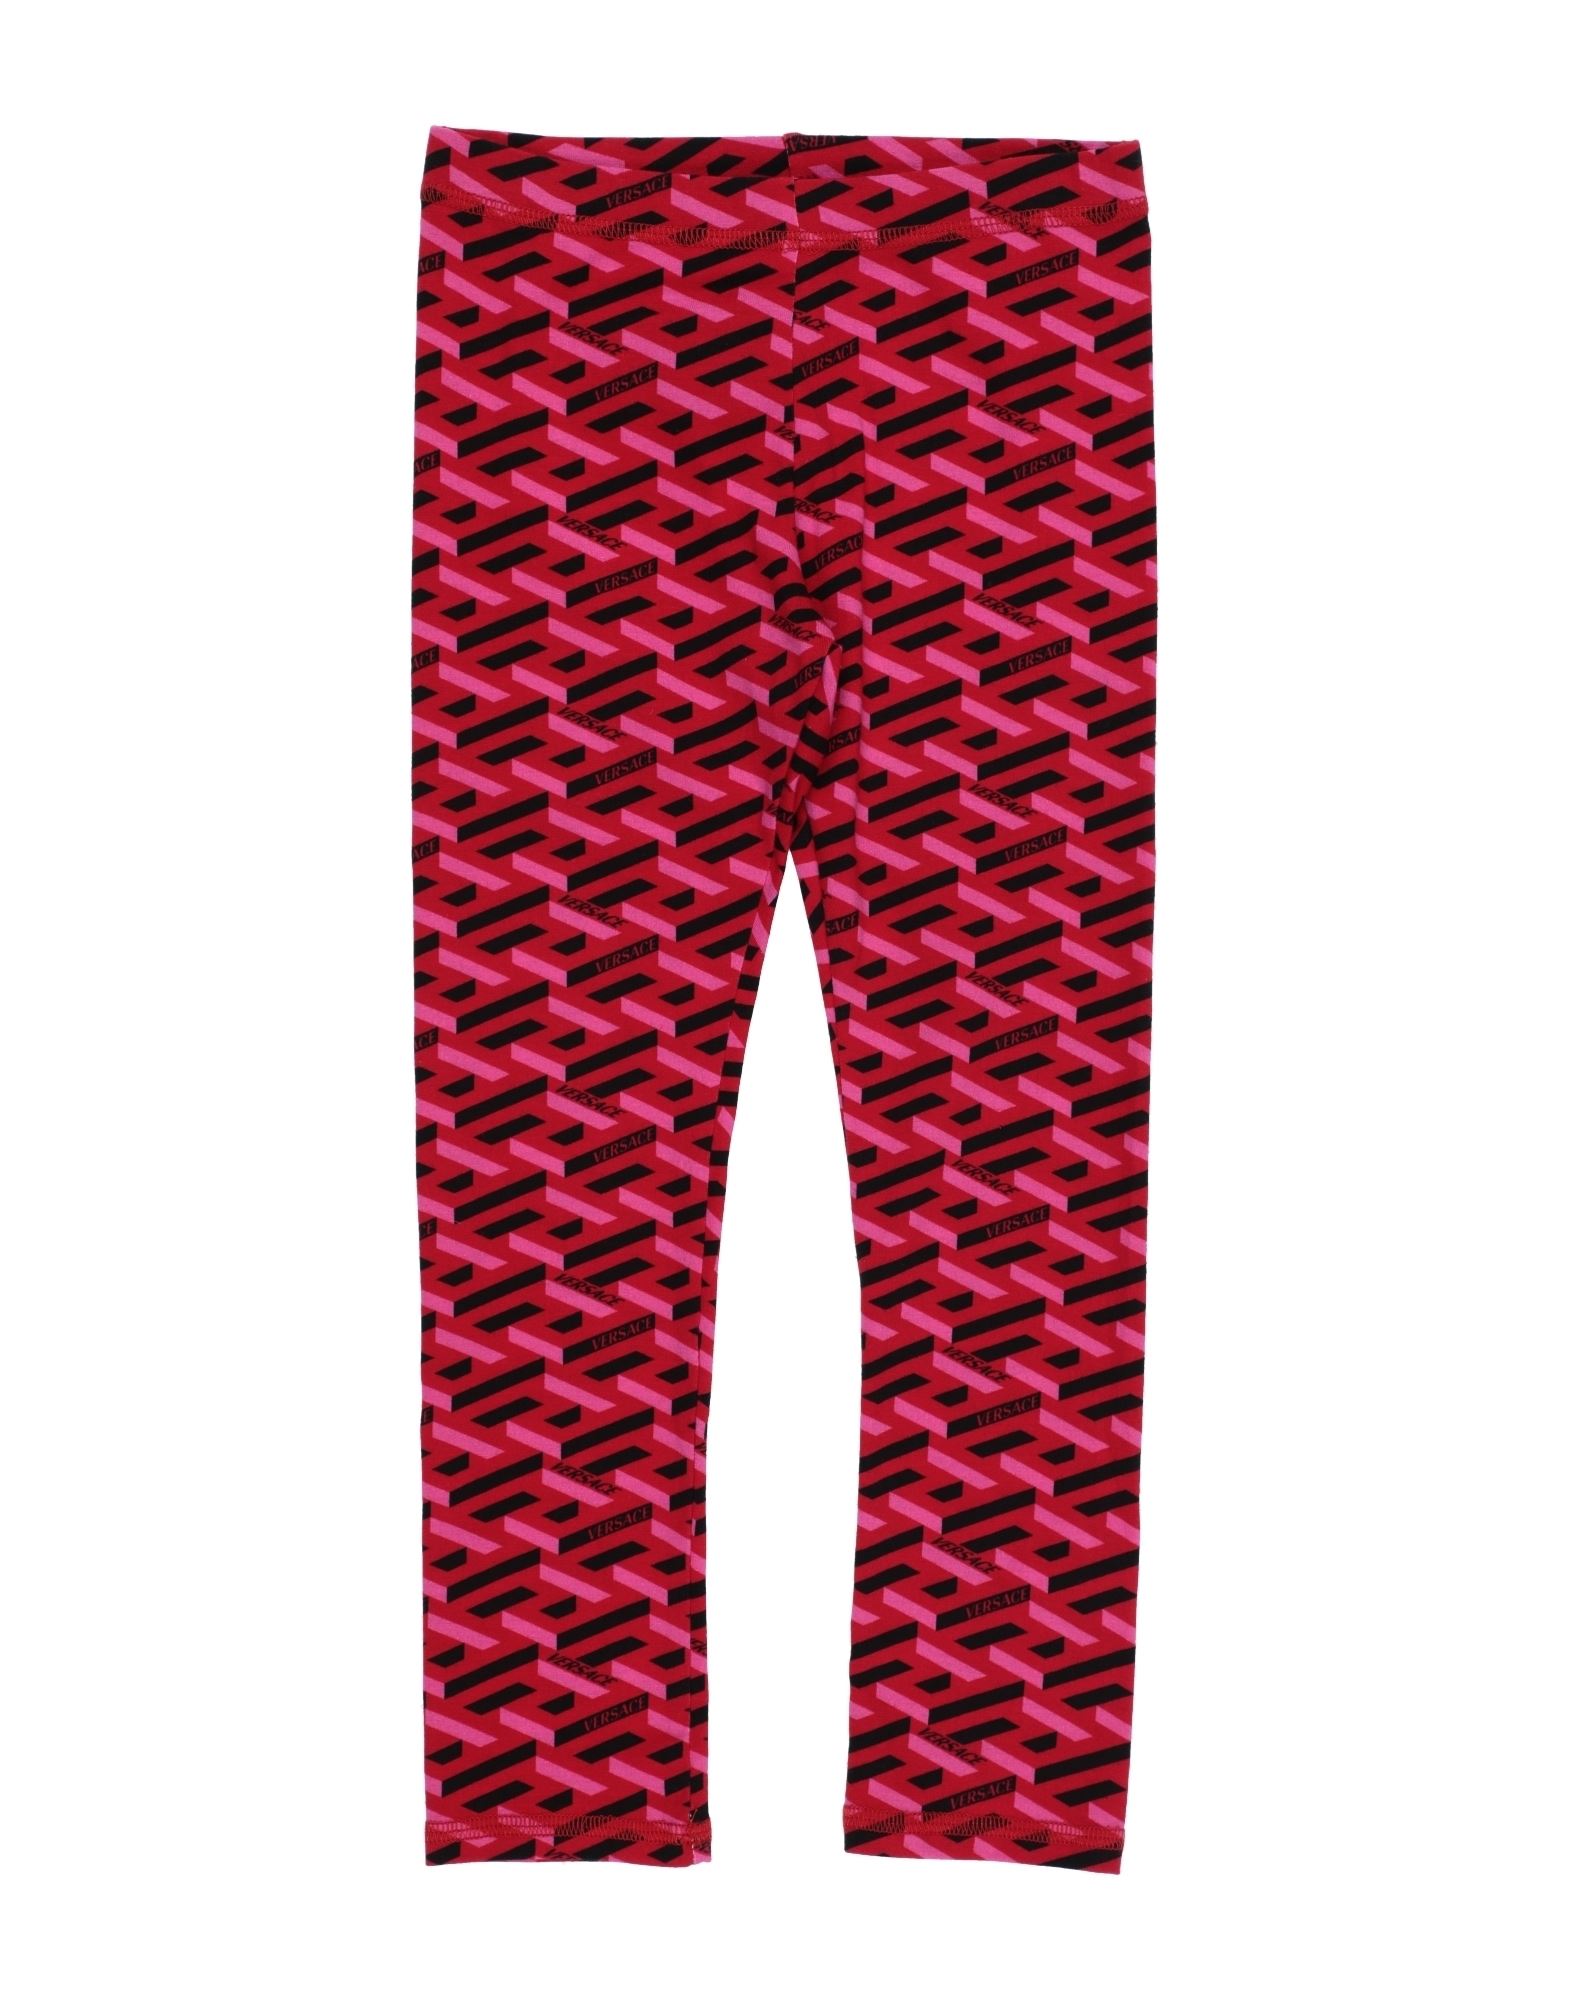 VERSACE YOUNG Leggings Kinder Rot von VERSACE YOUNG